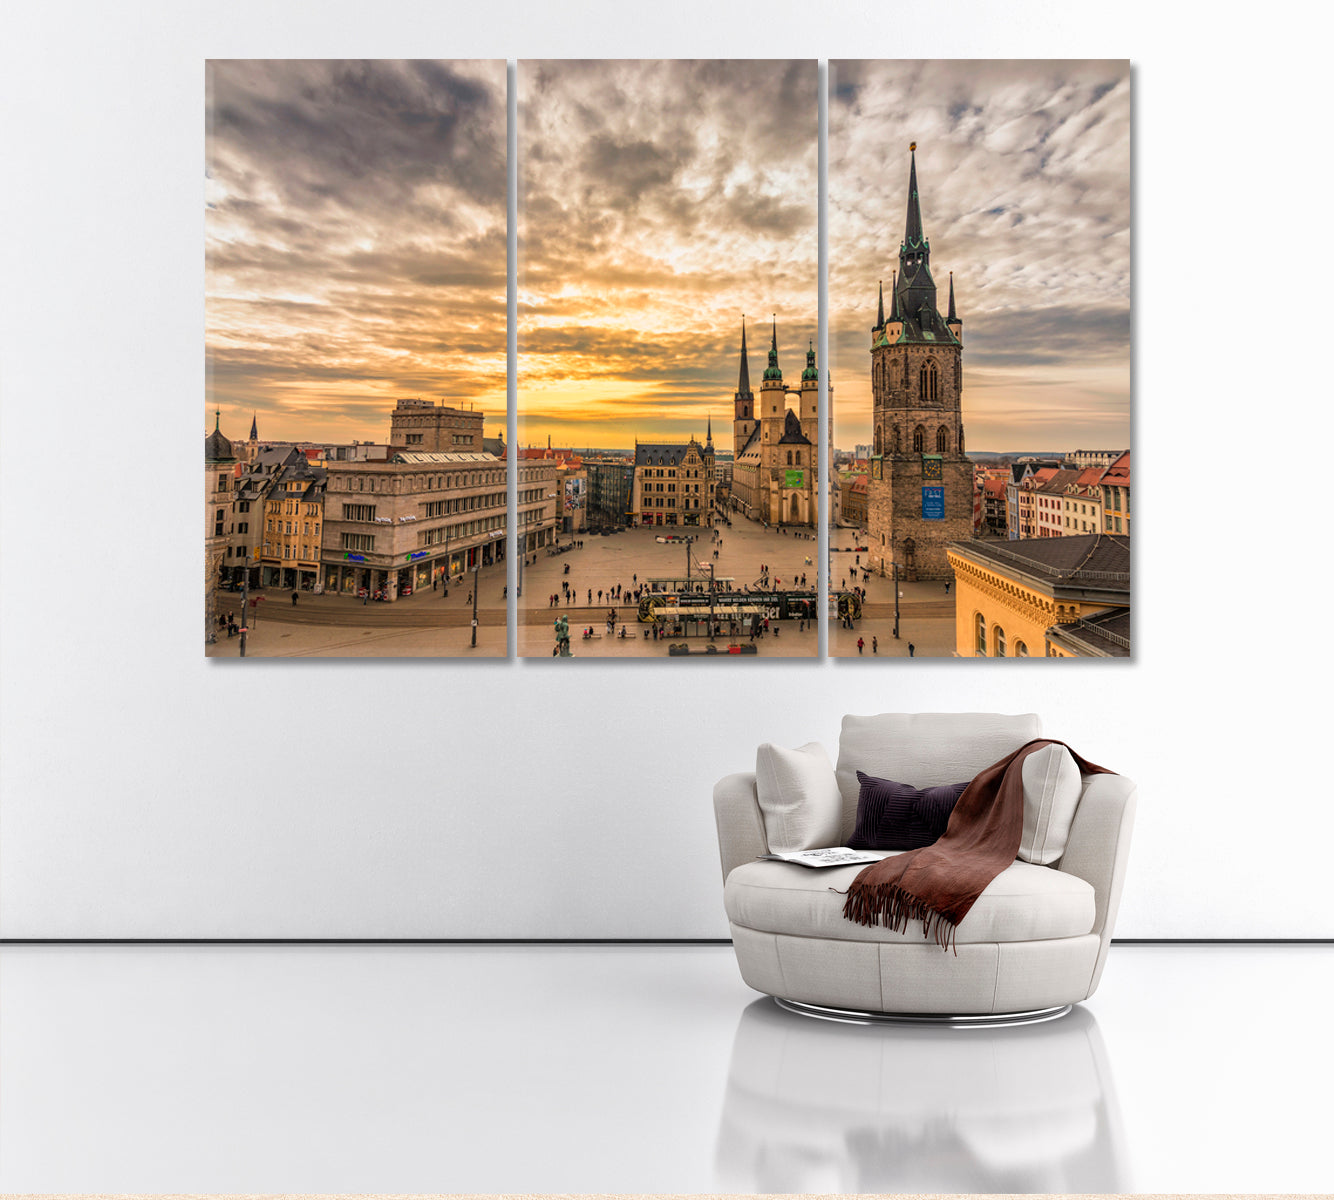 Halle Market Square Germany Canvas Print ArtLexy 3 Panels 36"x24" inches 